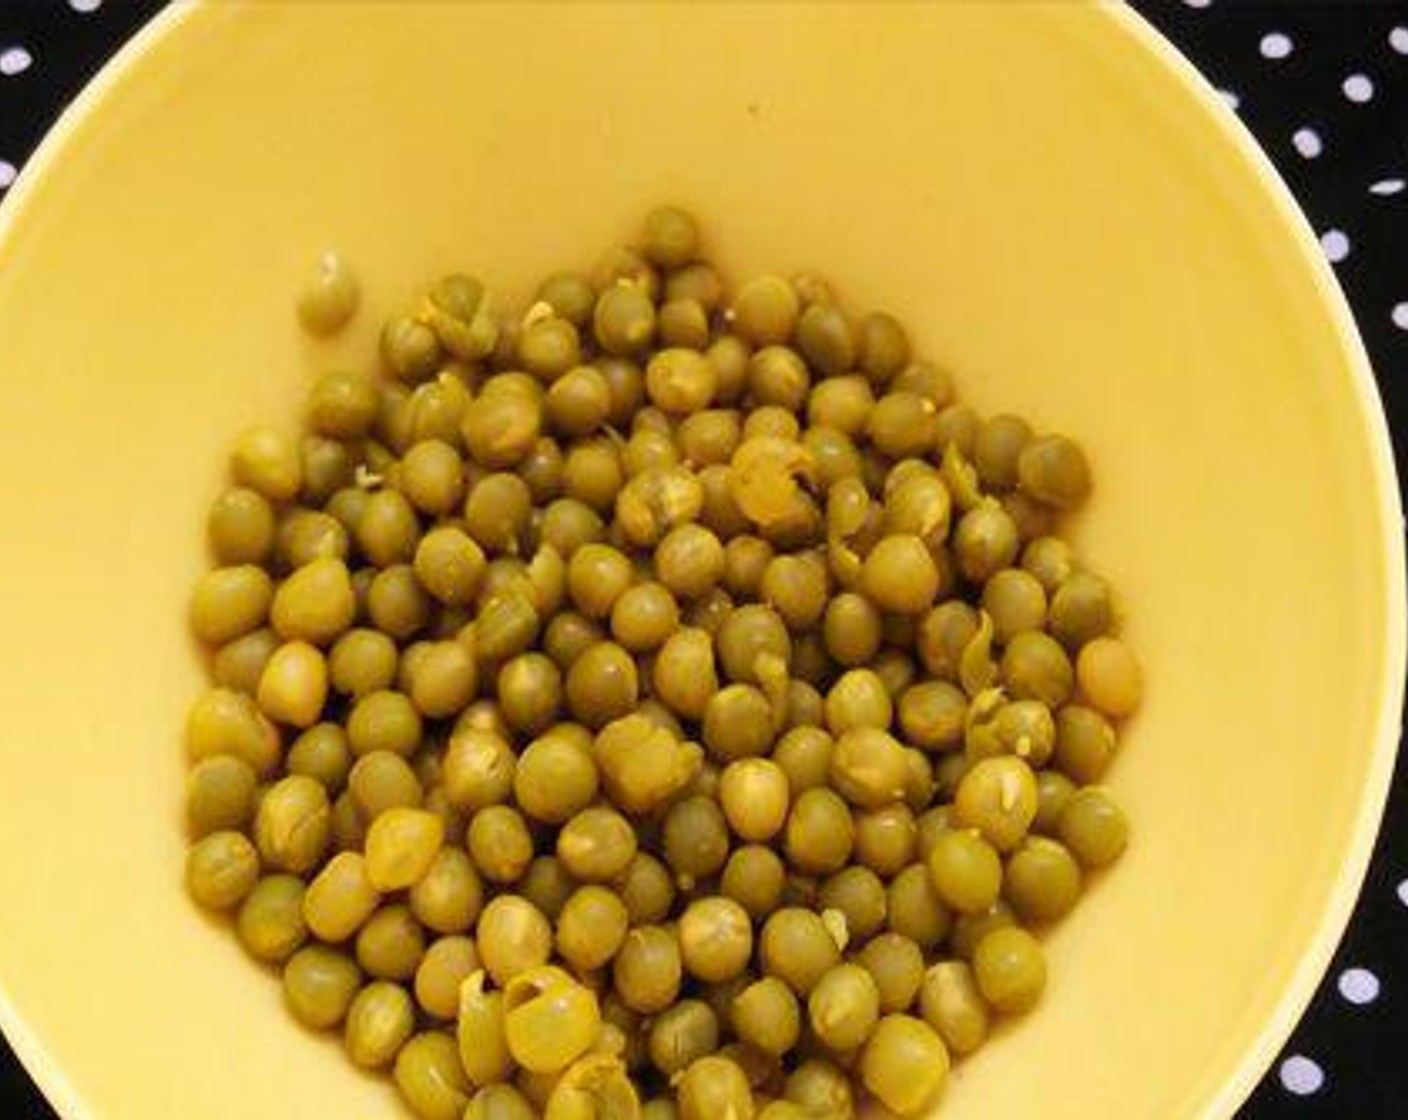 step 1 Pressure cook the Green Peas (1 cup), adding Ground Turmeric (1 pinch), Garam Masala (1/4 tsp), and Salt (to taste). Do not over cook and make it mushy.